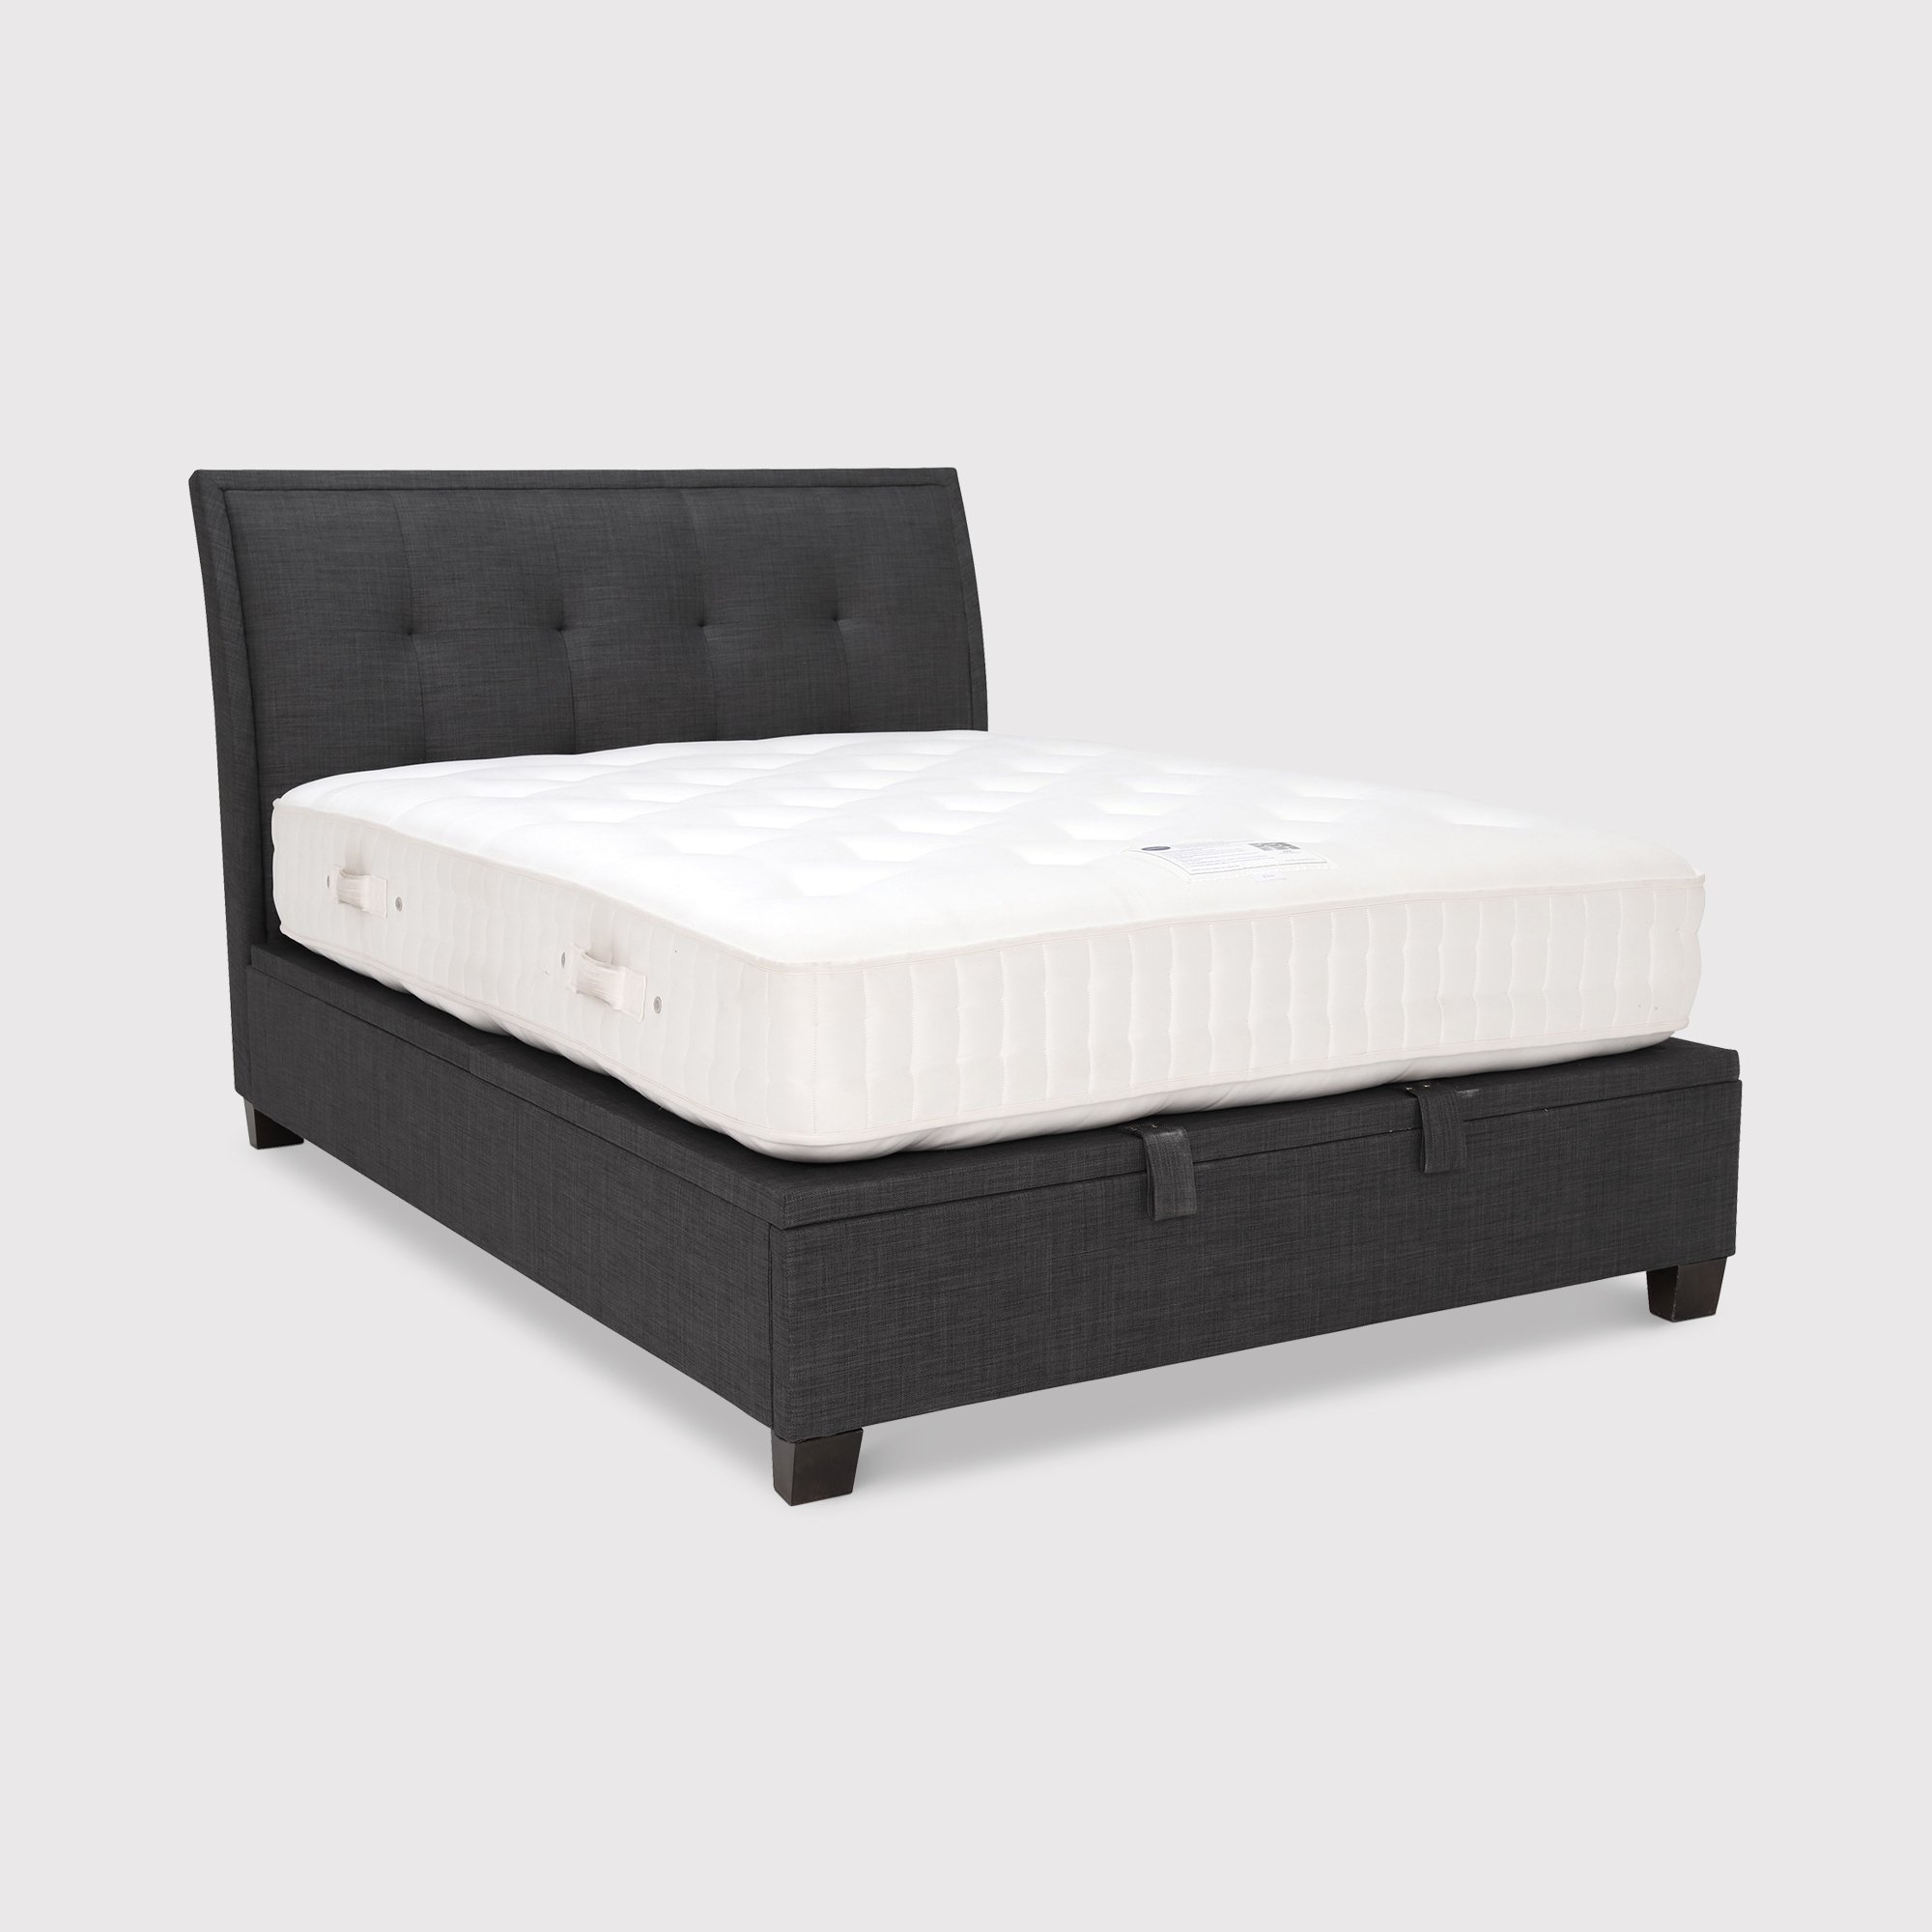 Photo of Sullivan ottoman bed frame 135cm in grey double